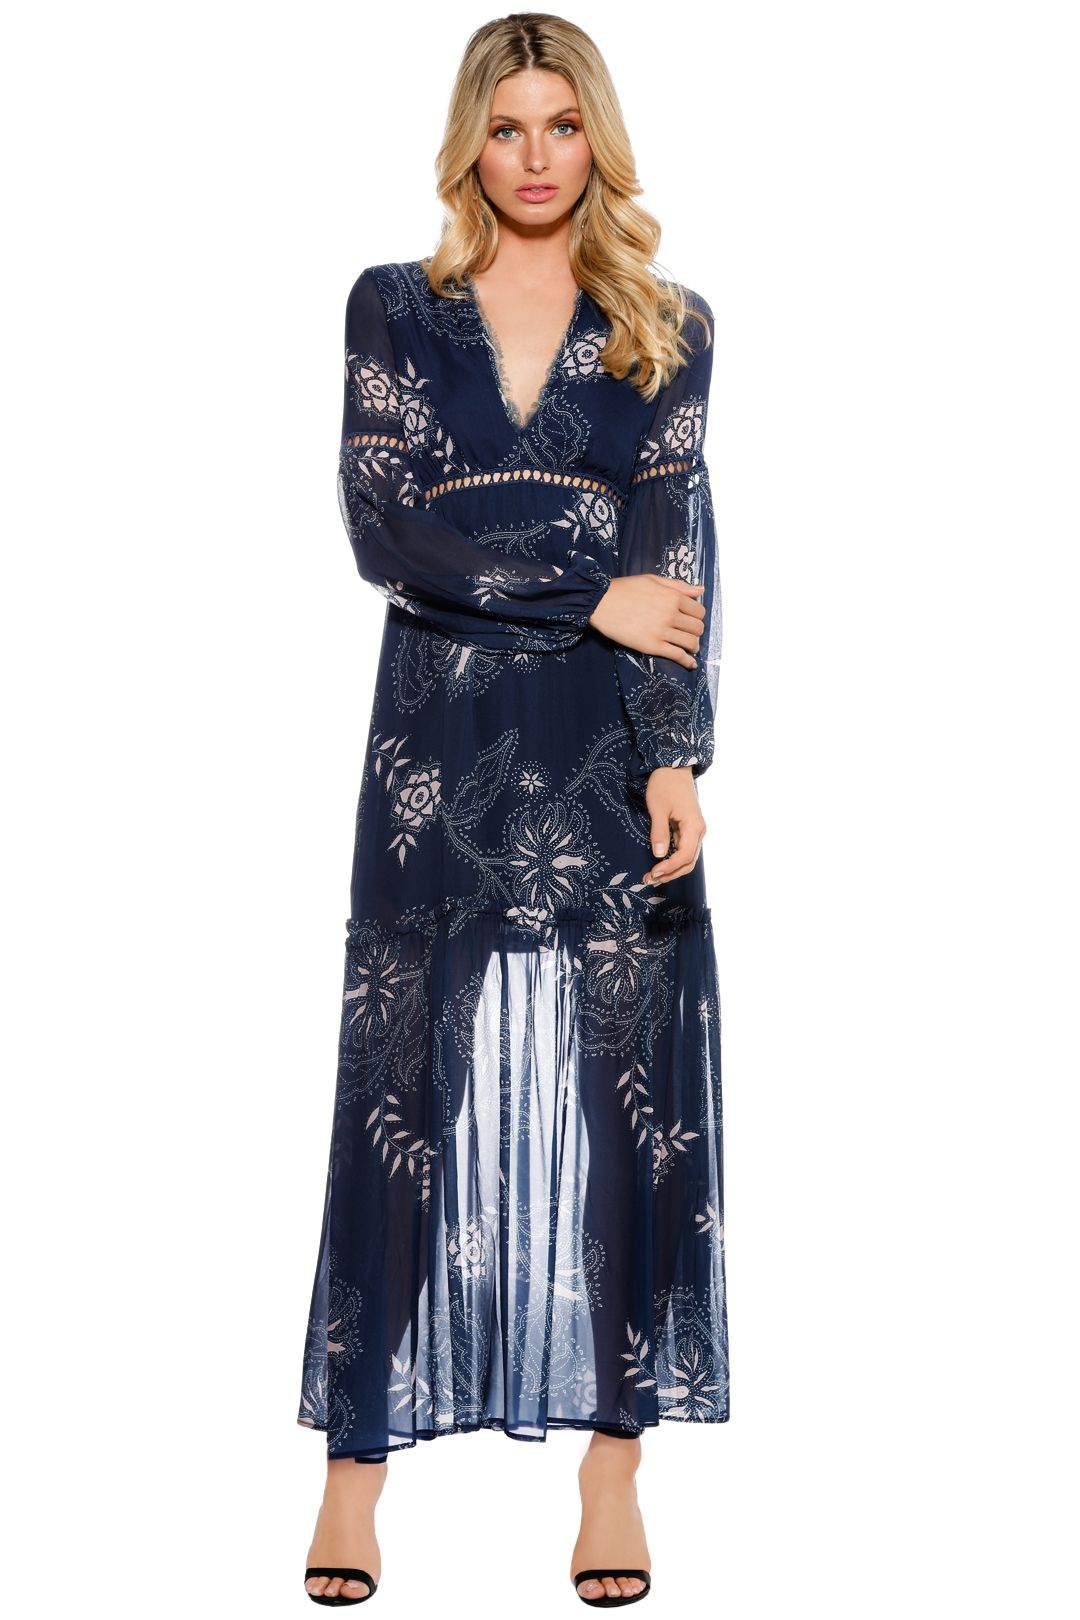 Ministry of Style - Estelle Maxi Dress - Blue - Front